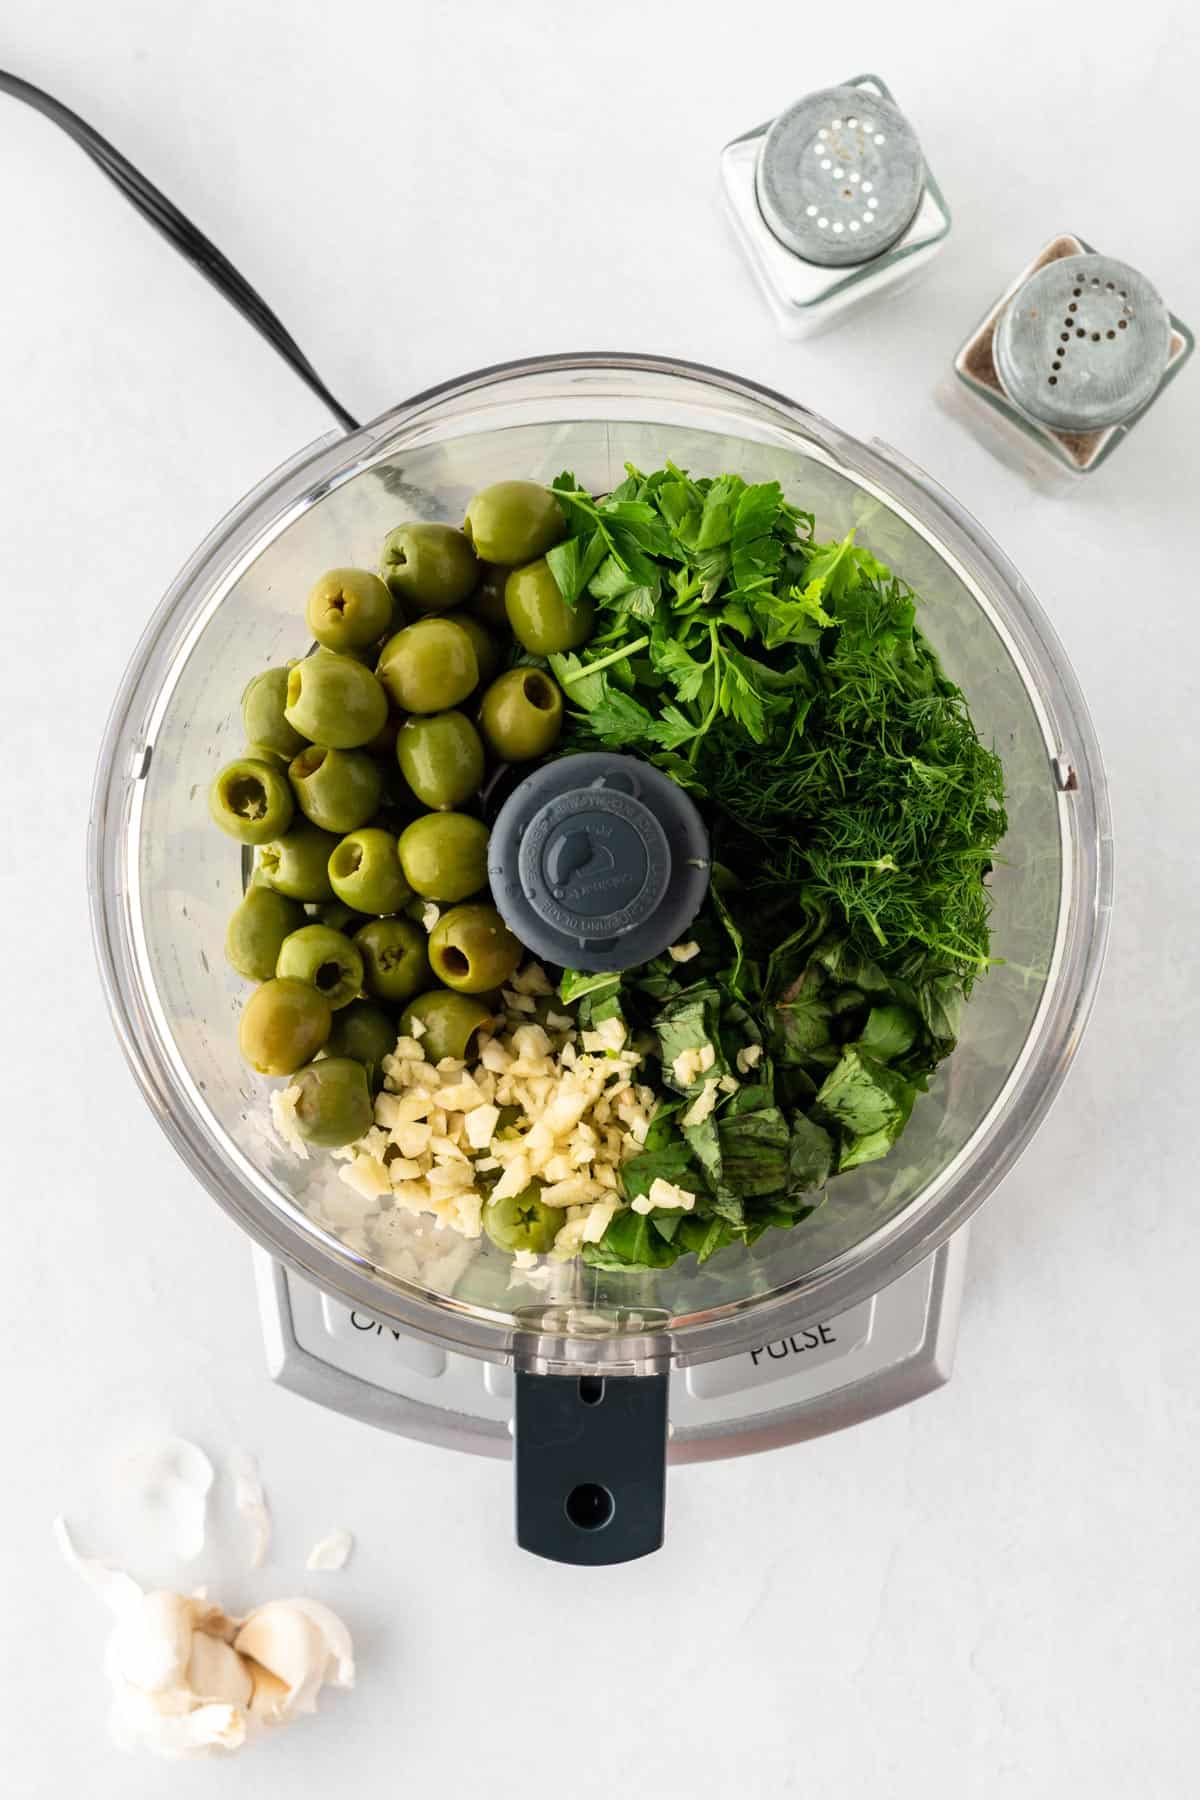 A photo of green olives, herbs, and garlic in a food processor.